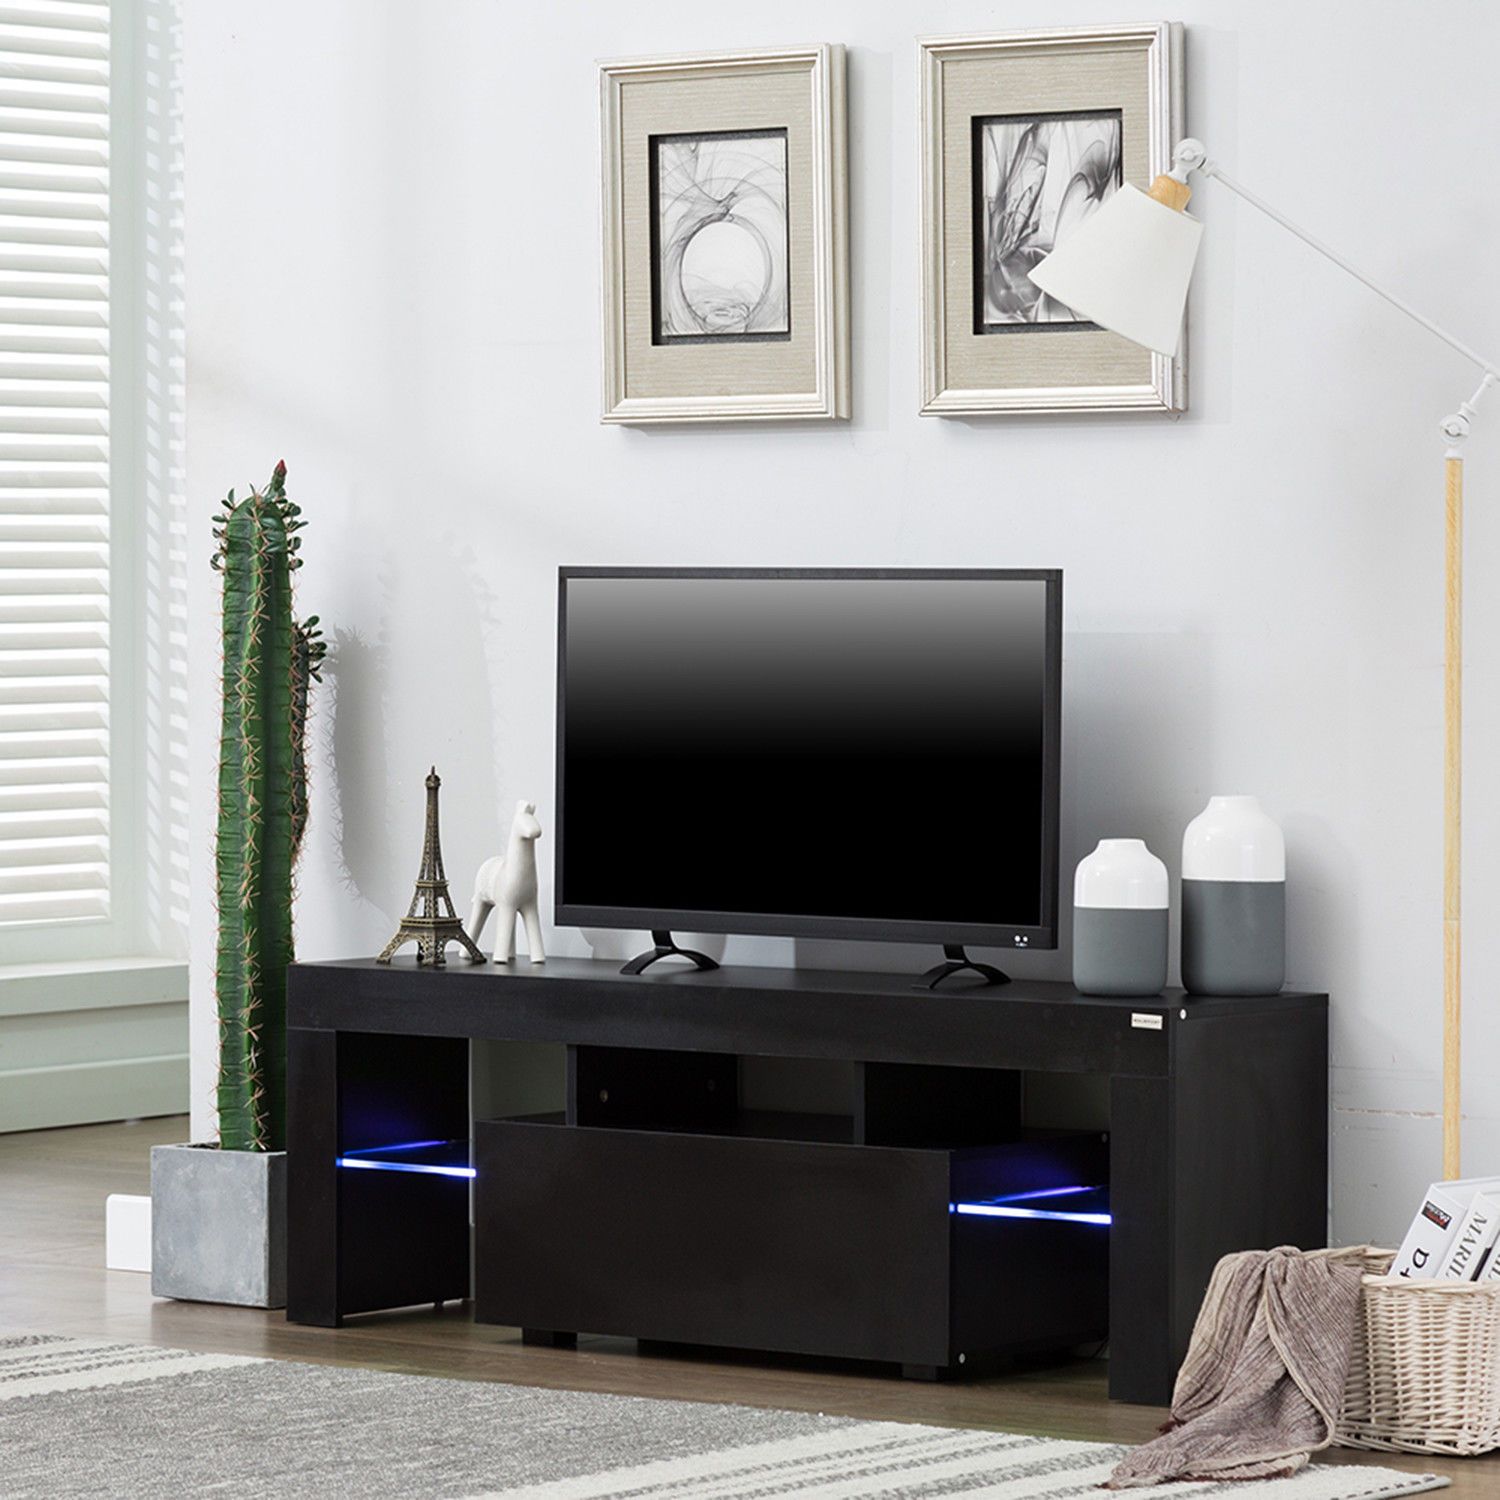 High Gloss Tv Stand Unit Cabinet Console Furniture W/led With Regard To Tv Cabinets Black High Gloss (View 12 of 15)